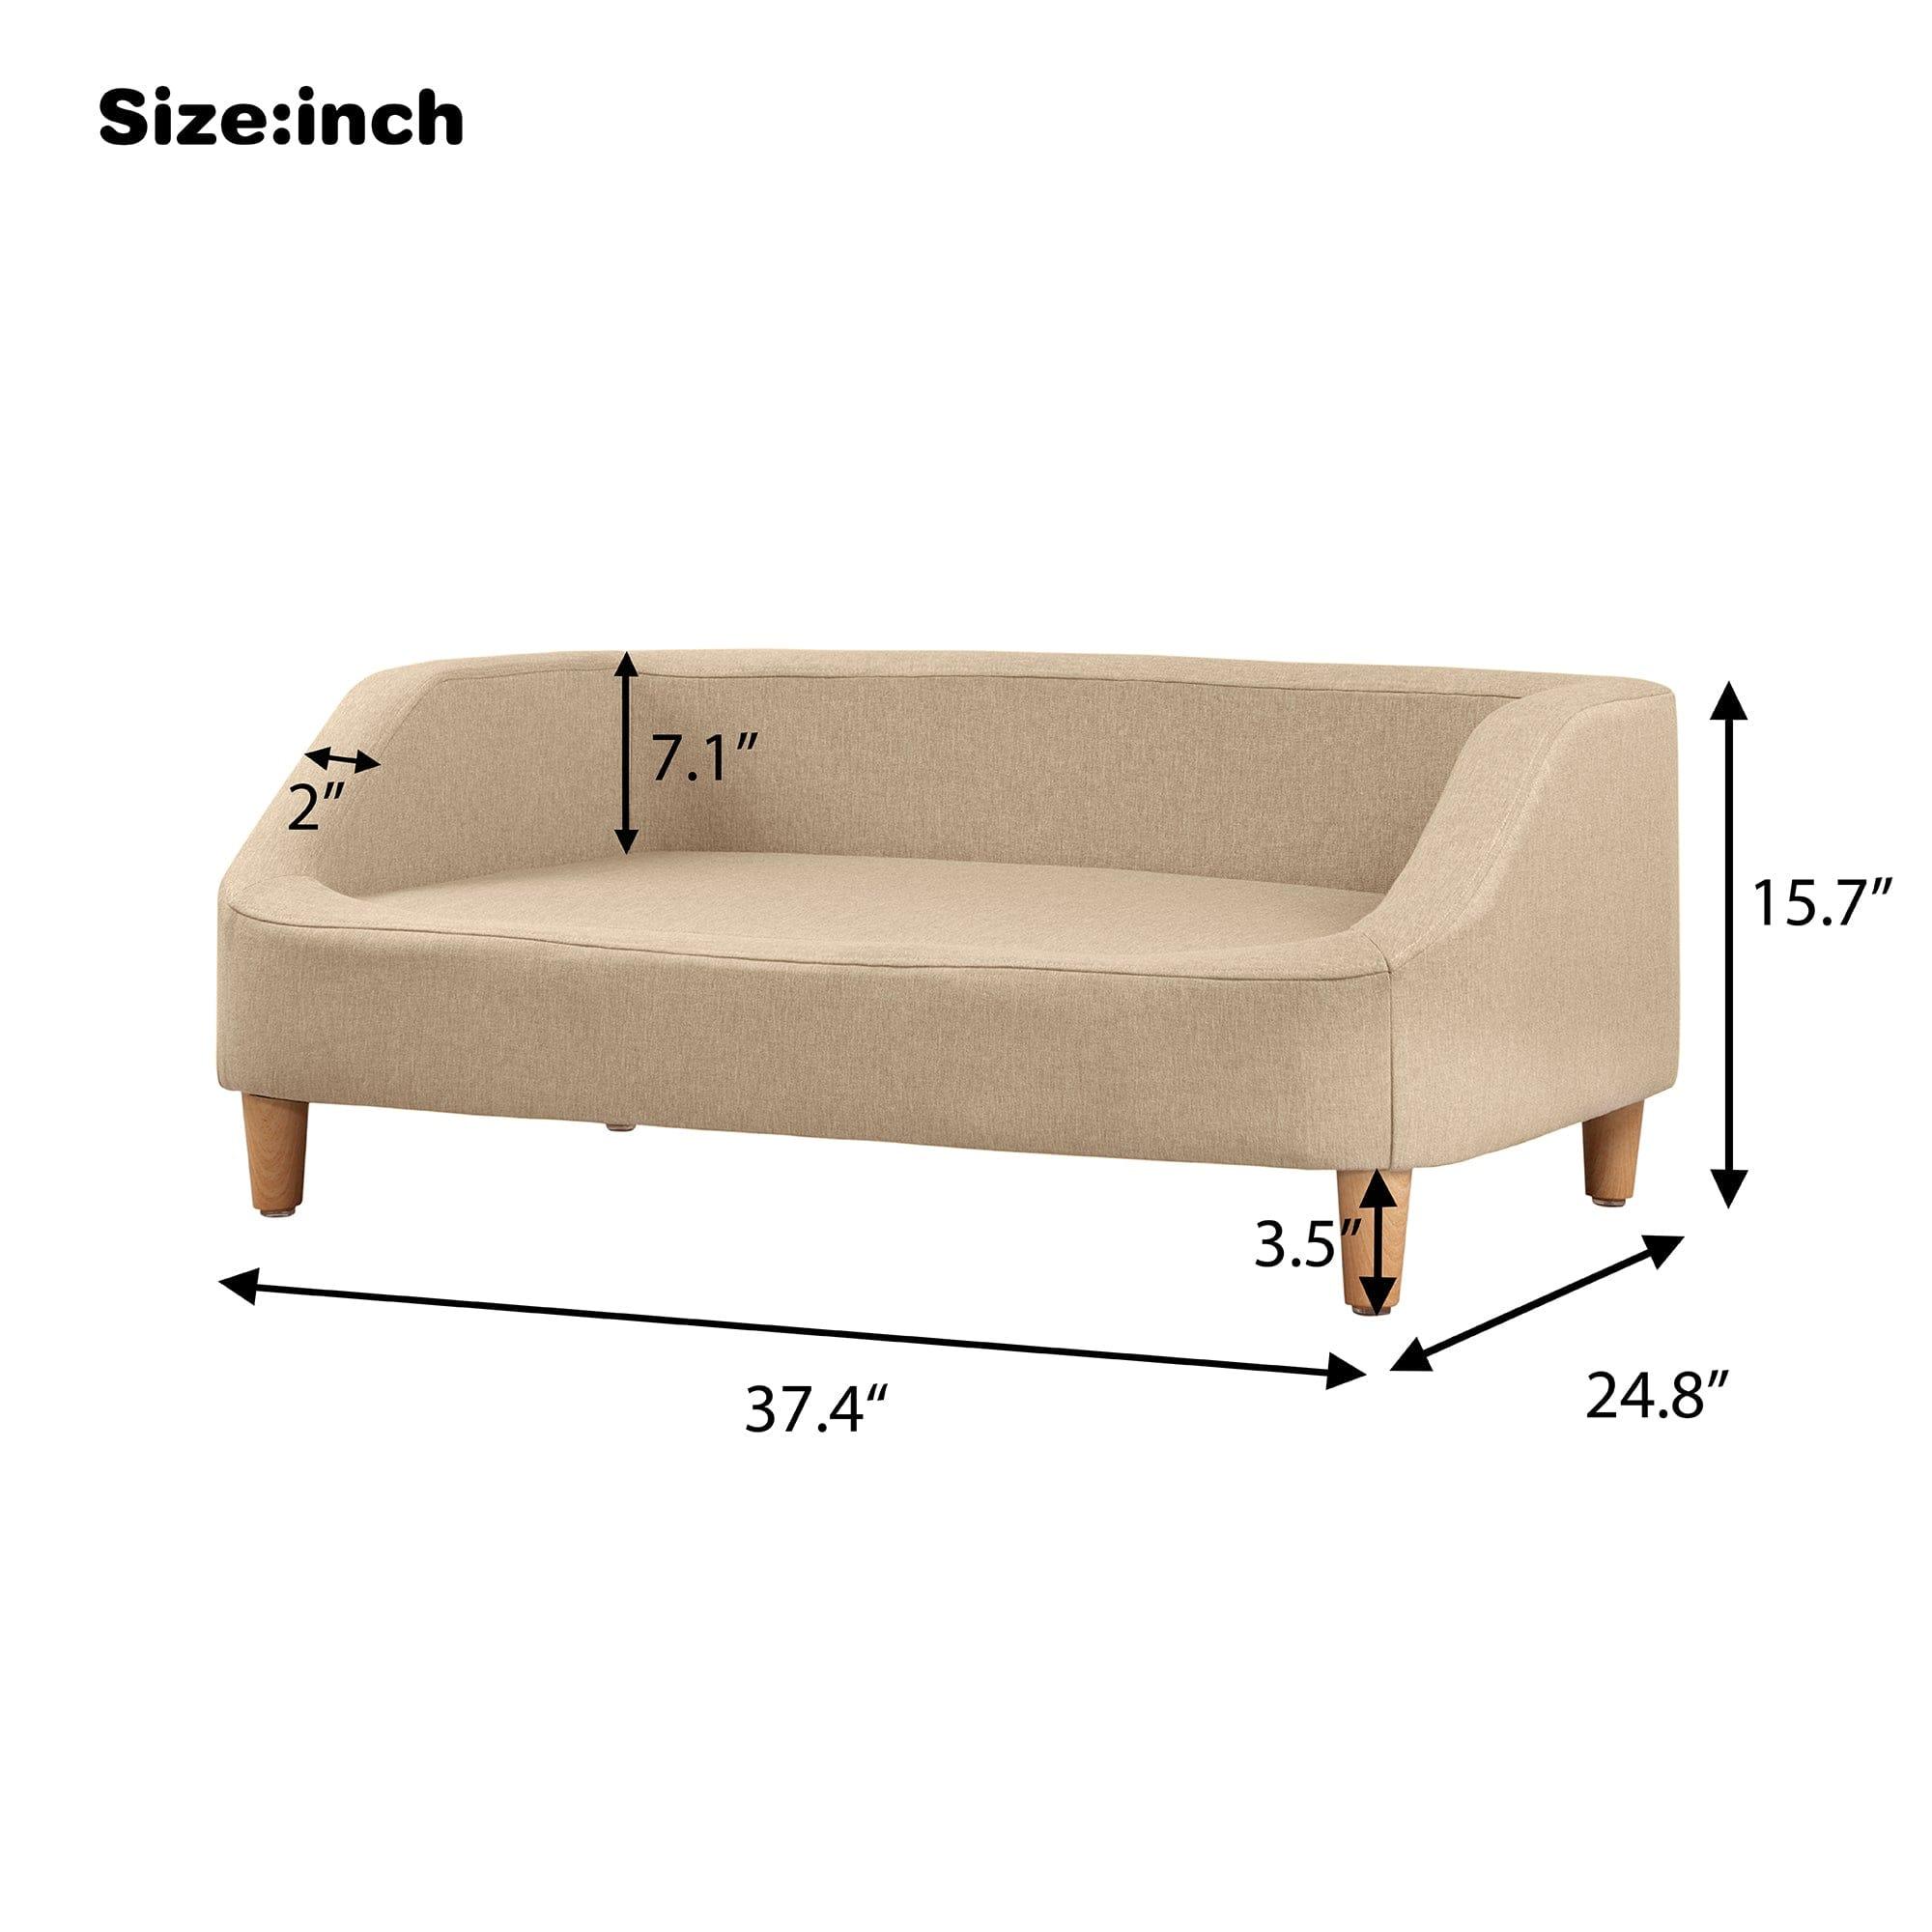 Shop 37" Beige Pet Sofa, Dog Sofa, Cat sofa, Cat Bed, Pet Bed, Dog Bed, Cat Bed, rectangle sofa with movable cushion, with wood style foot Mademoiselle Home Decor